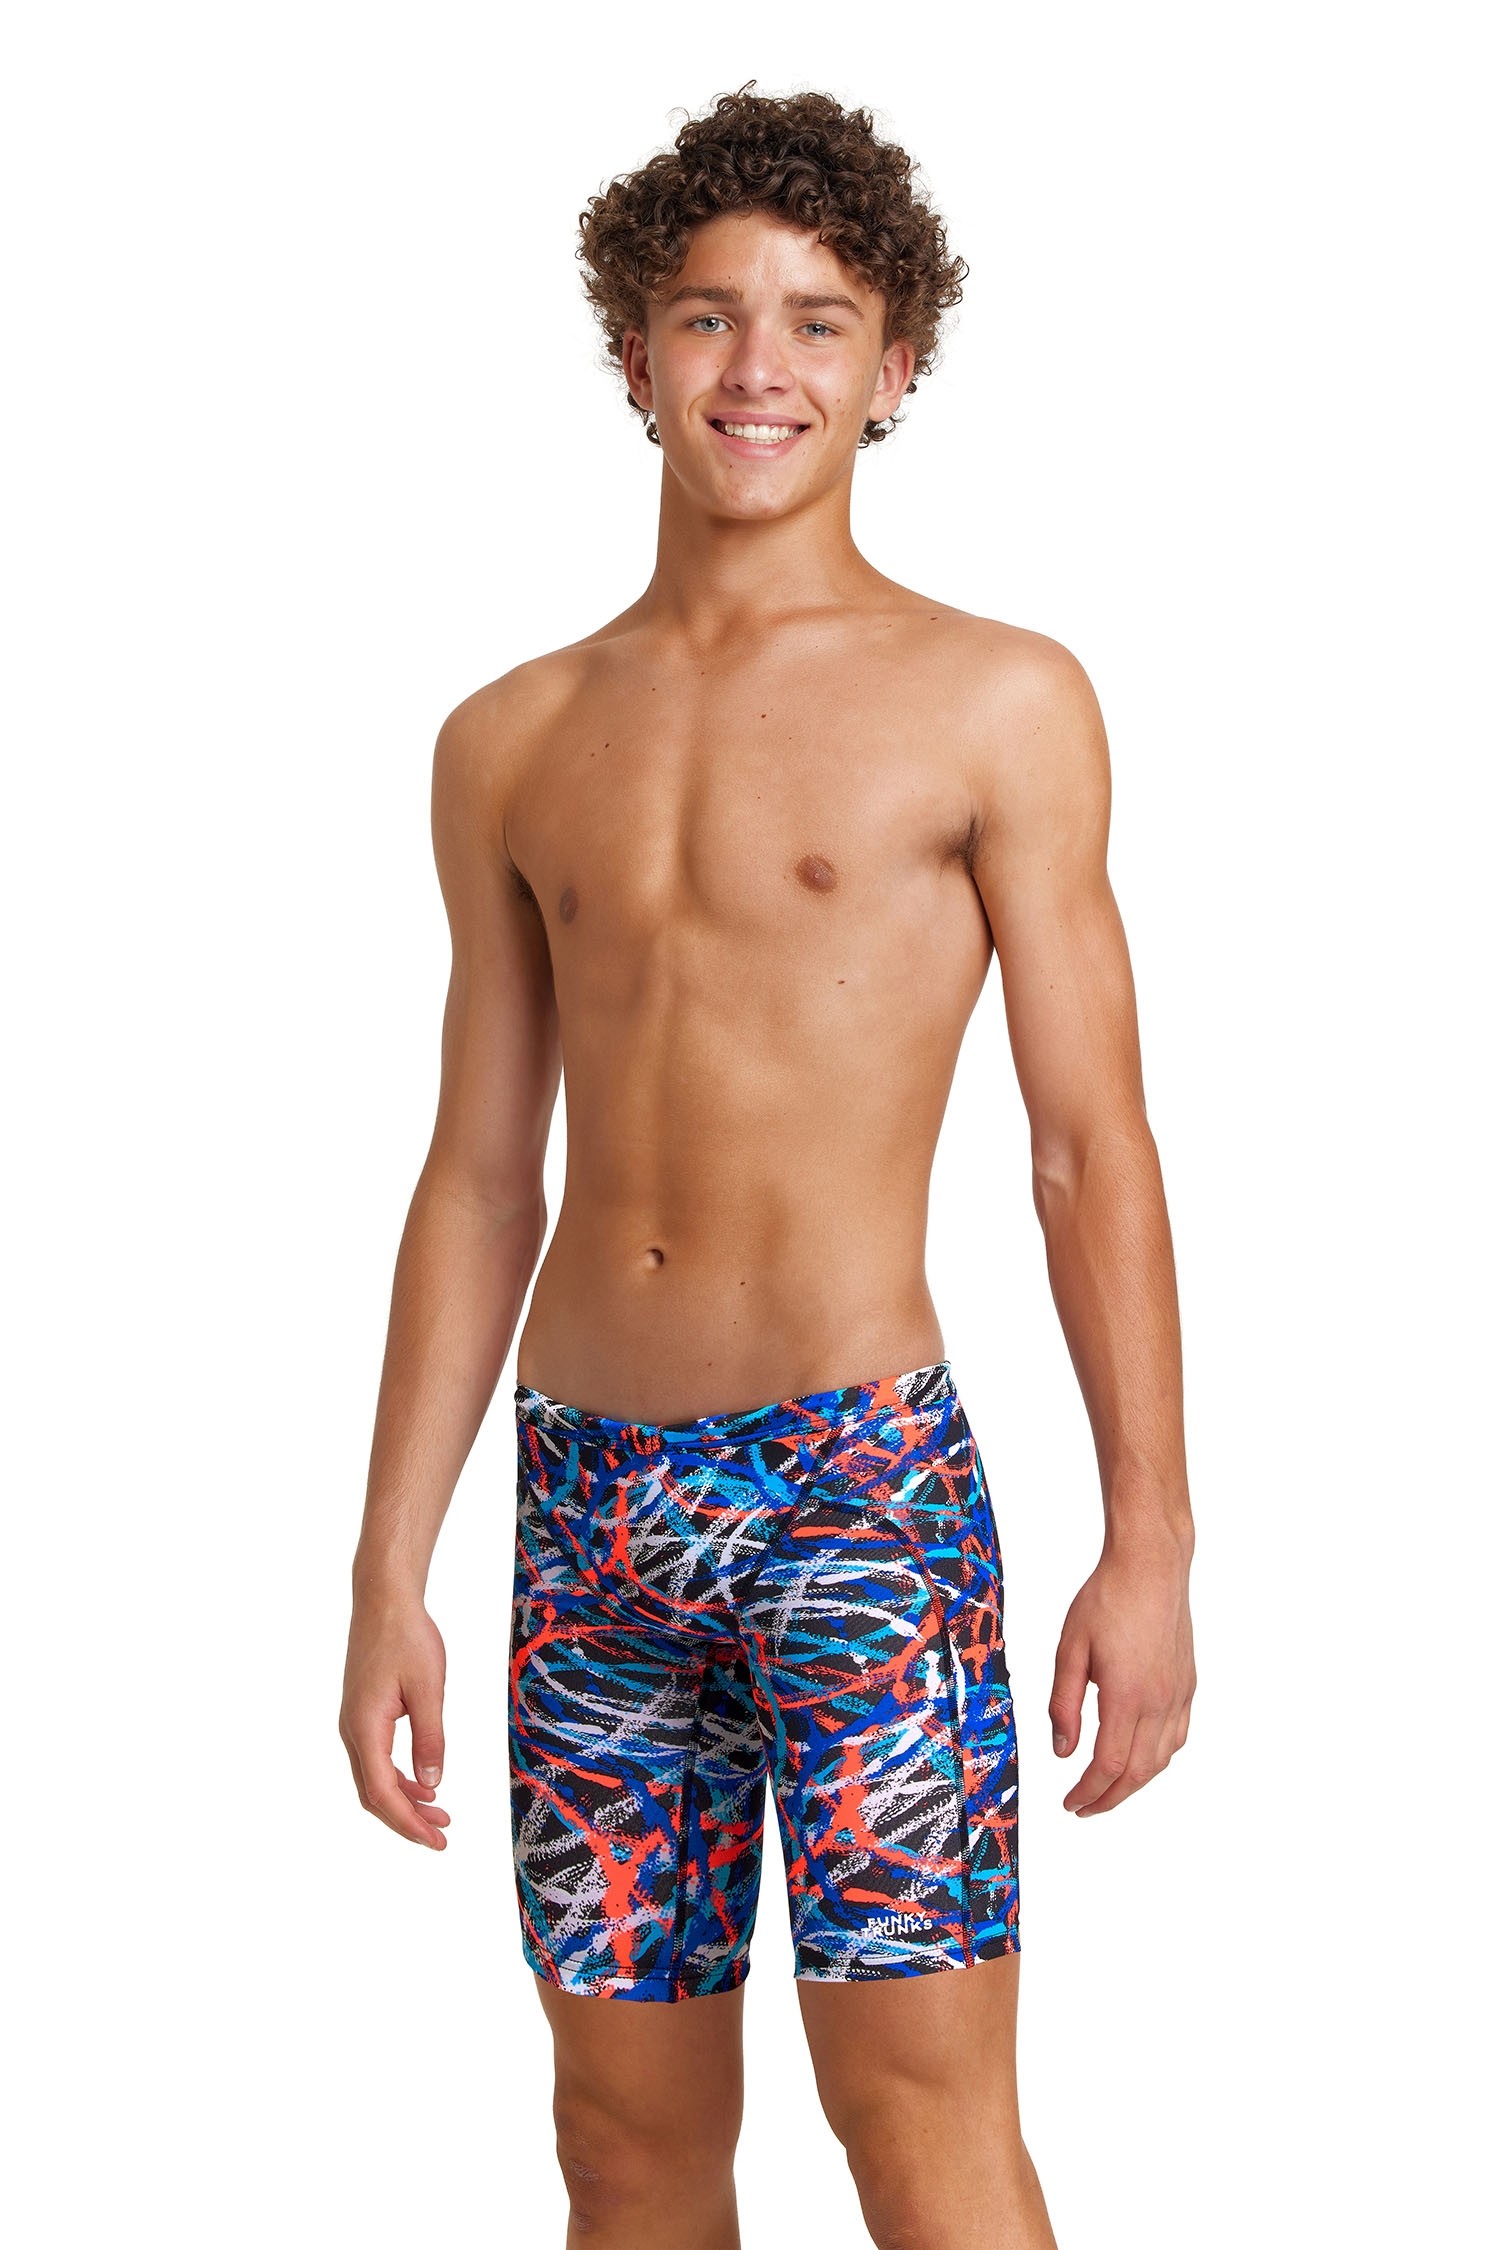 Funky Trunks Boys Spin Doctor Training Jammers